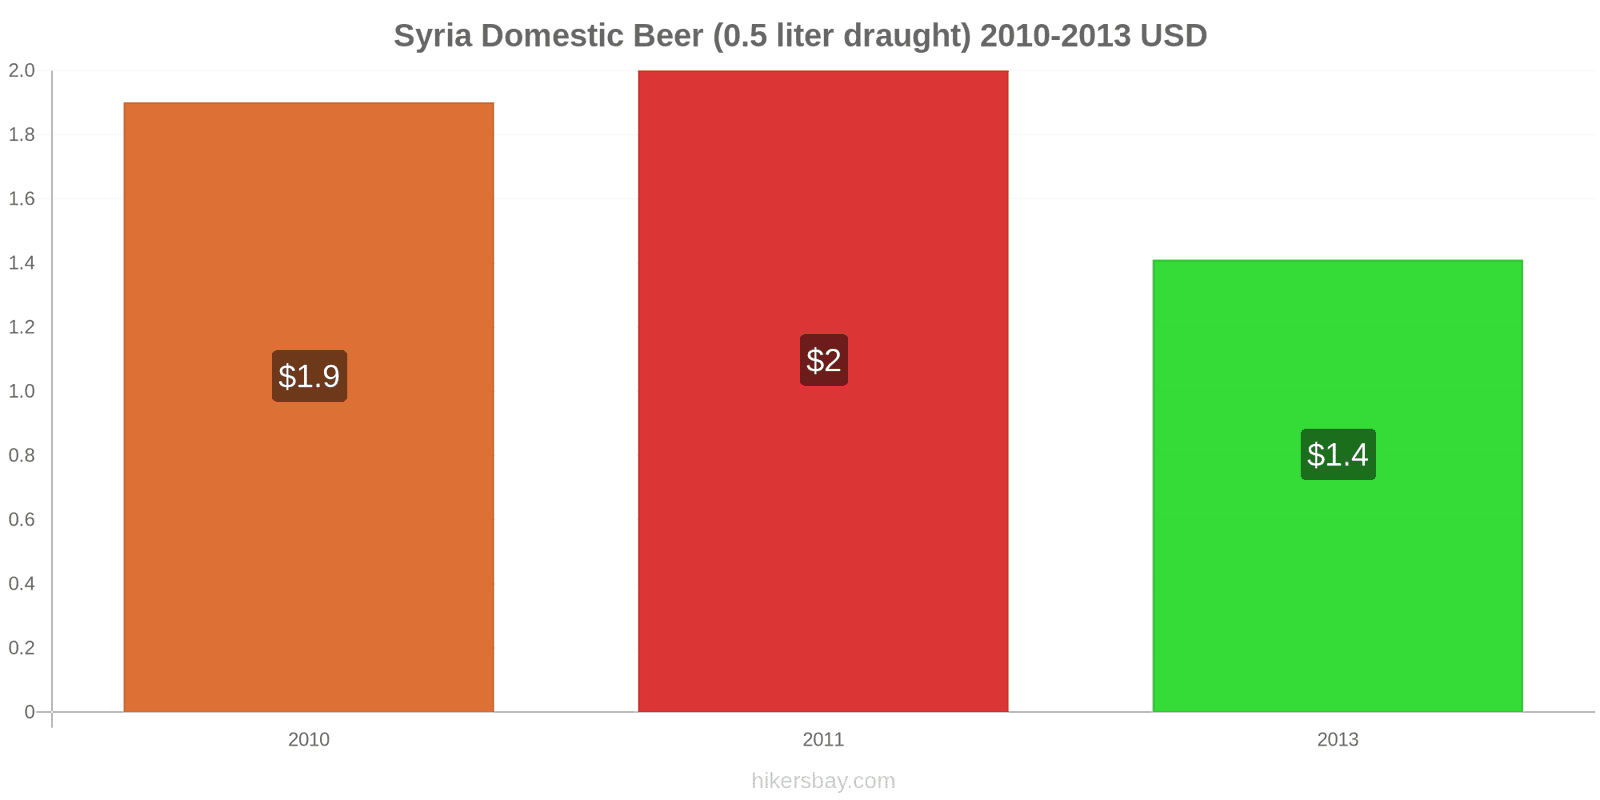 Syria price changes Domestic Beer (0.5 liter draught) hikersbay.com